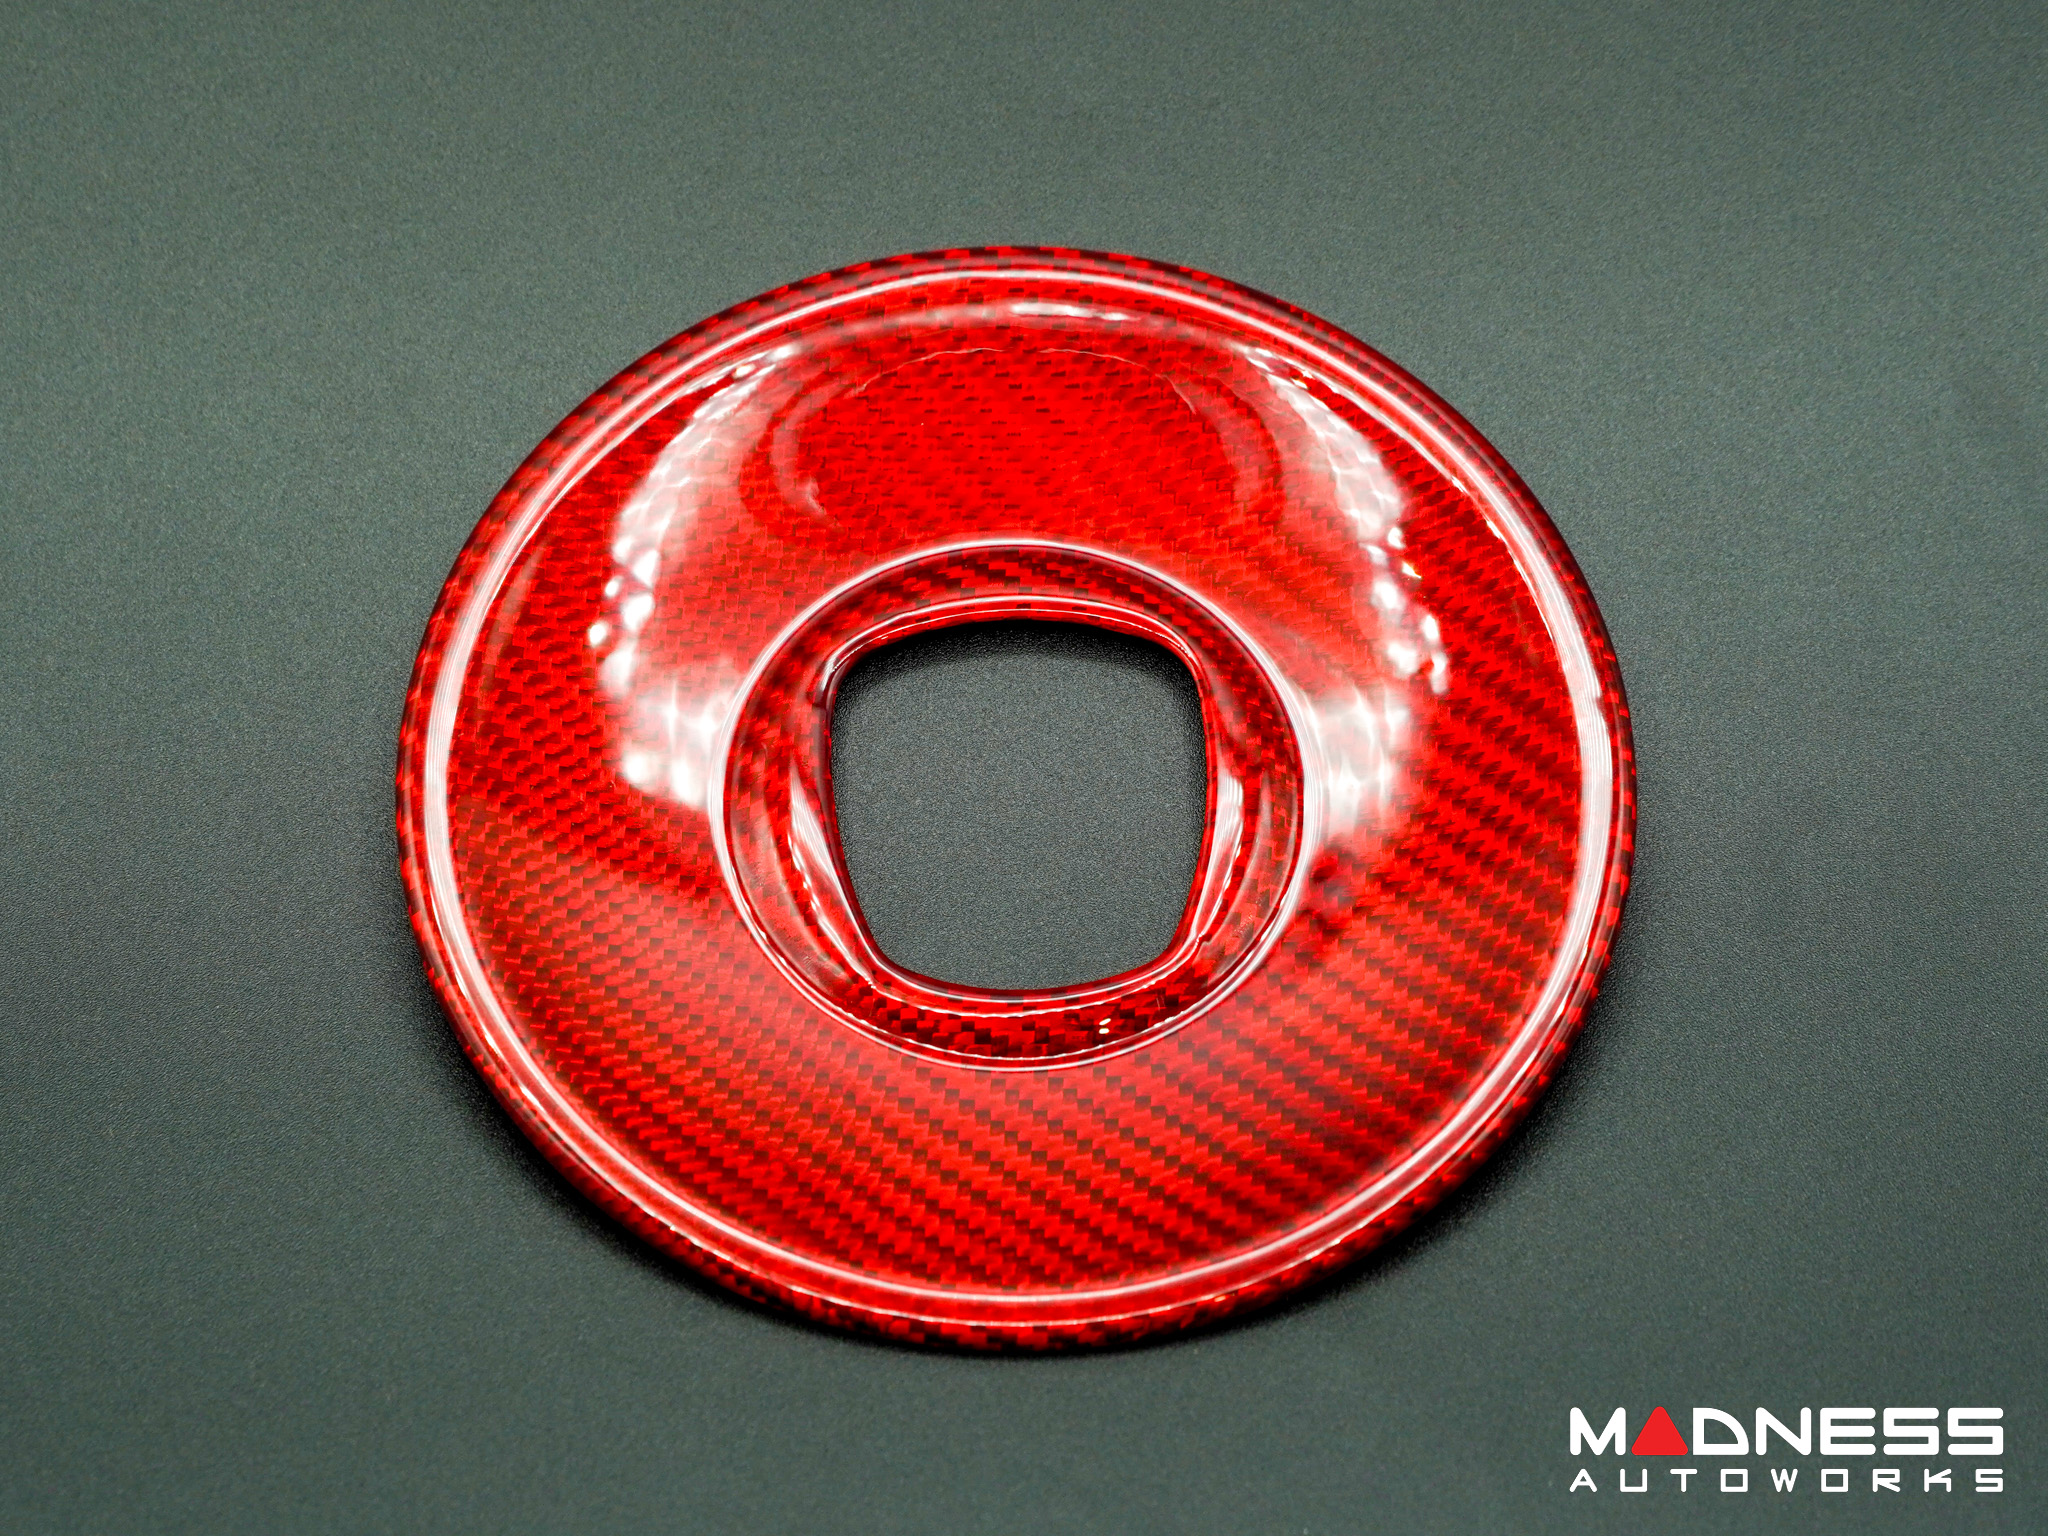 FIAT 500 Steering Wheel Trim - Carbon Fiber - Airbag Center - Large Outer Cover - Red Pearl Finish